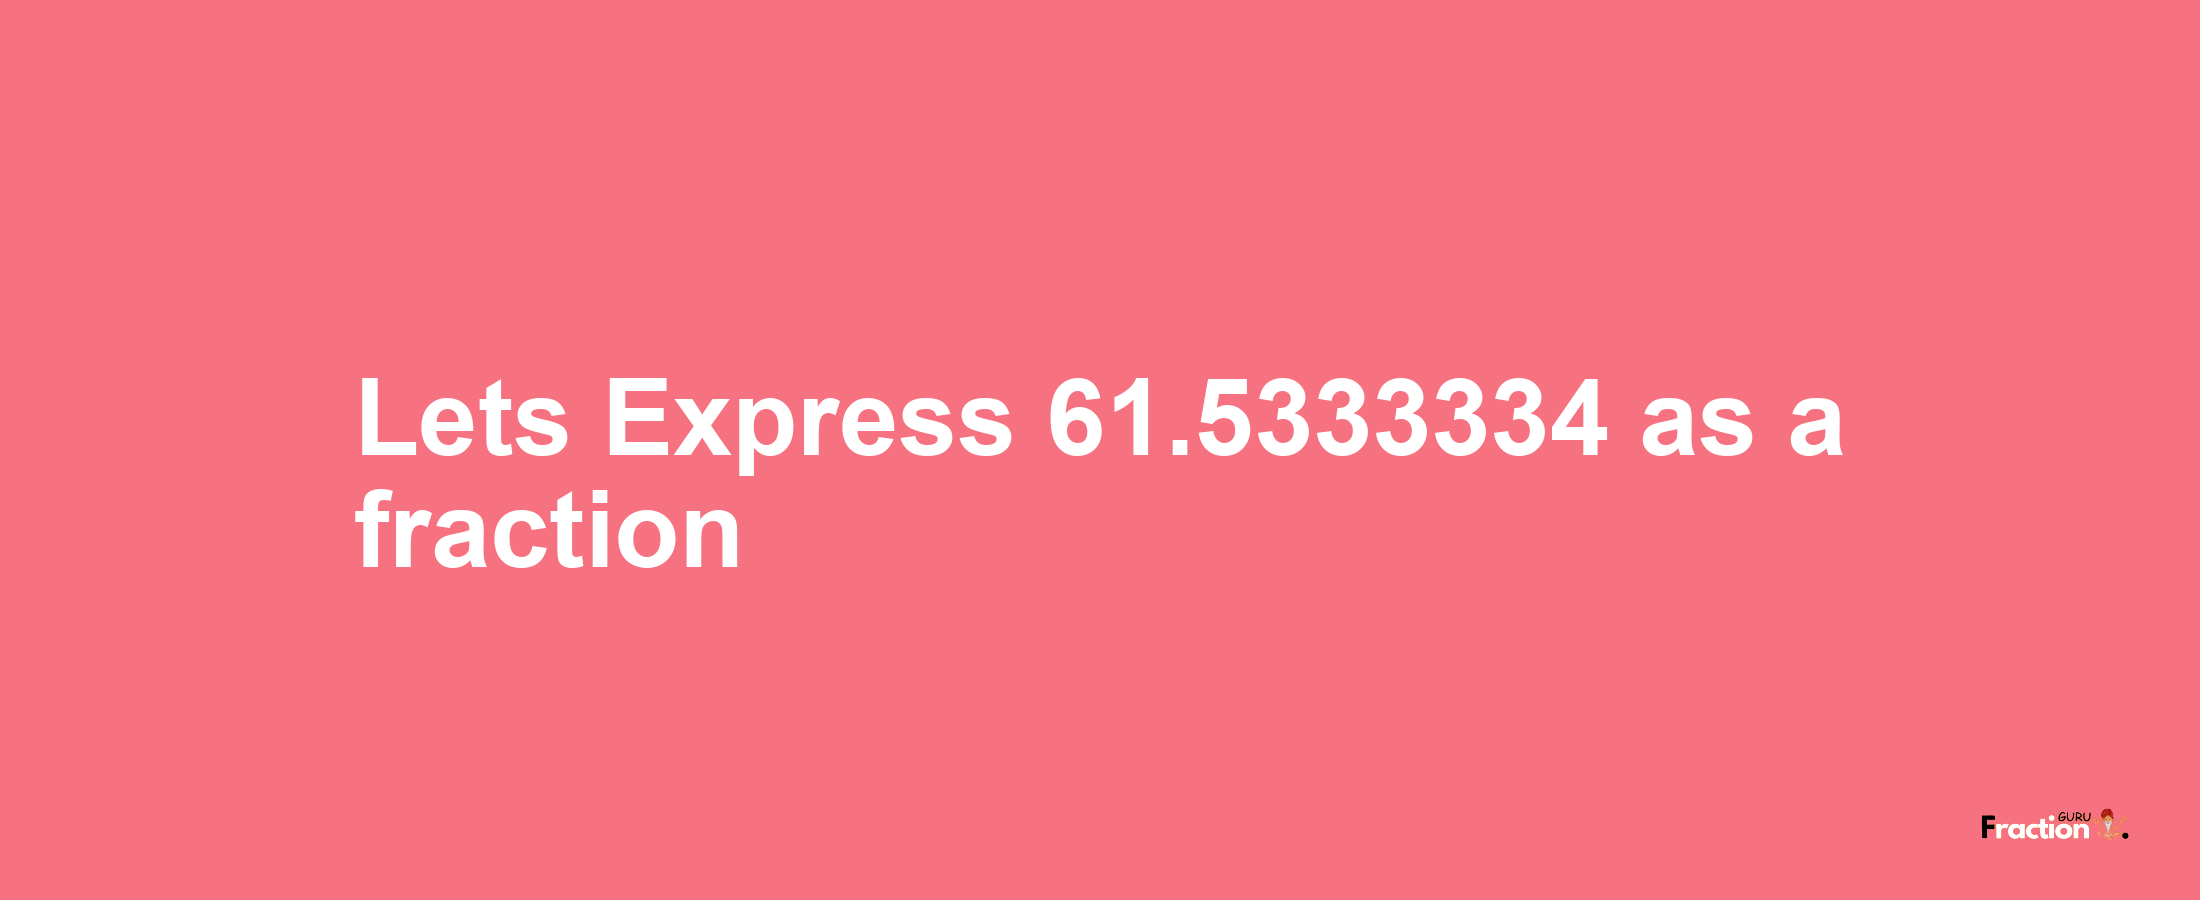 Lets Express 61.5333334 as afraction